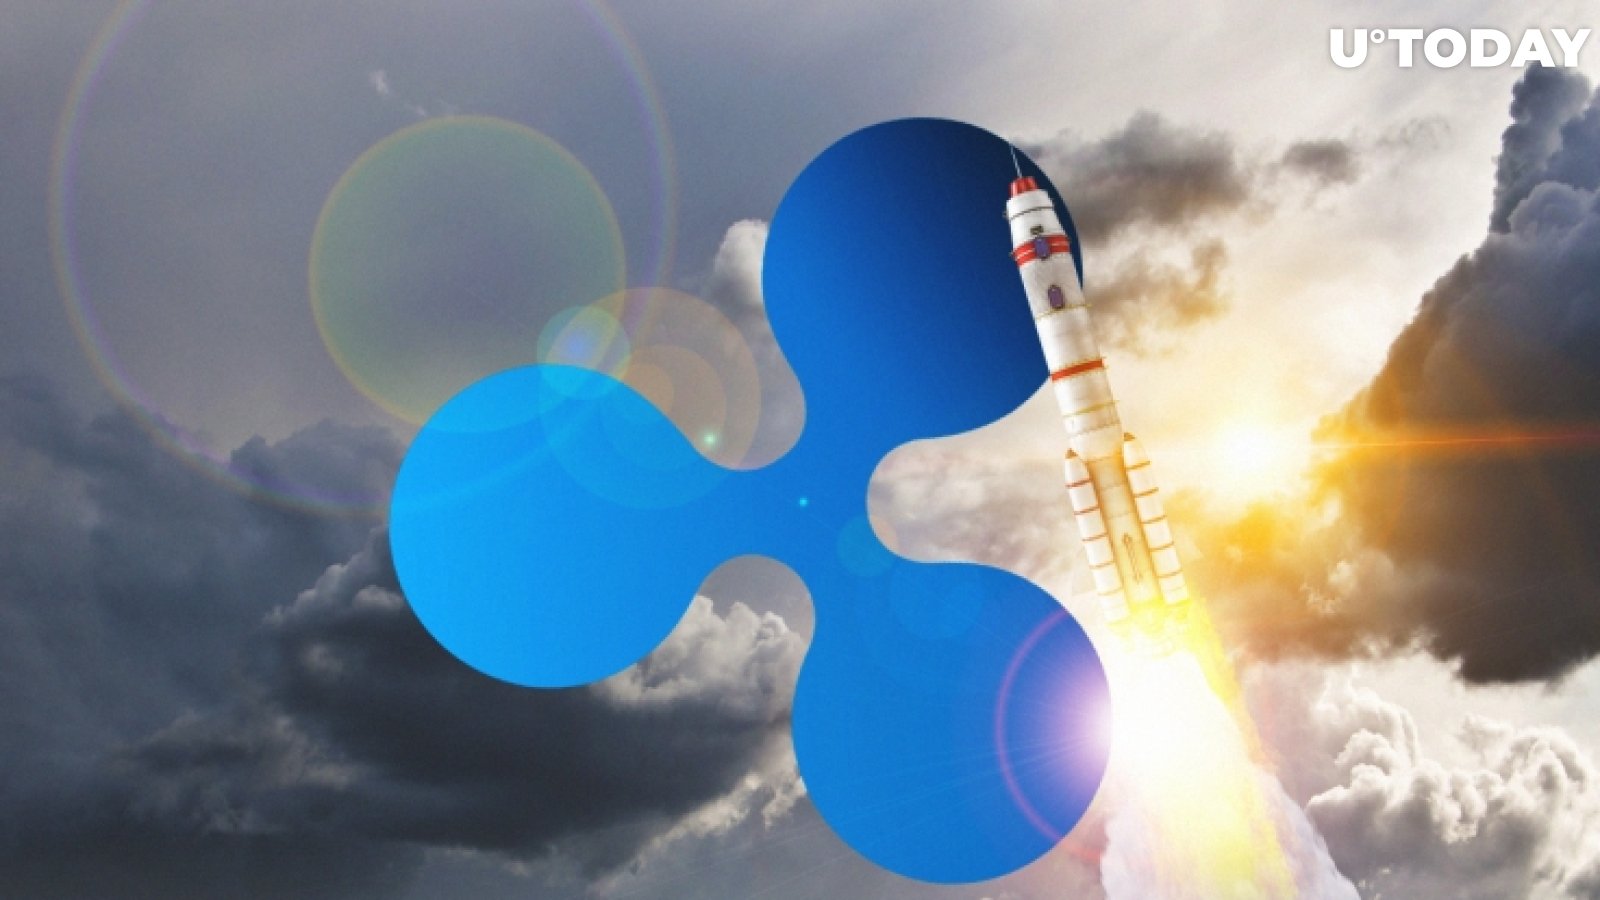 Blockchain Giant Ripple Recognized as One of Fastest-Growing Companies